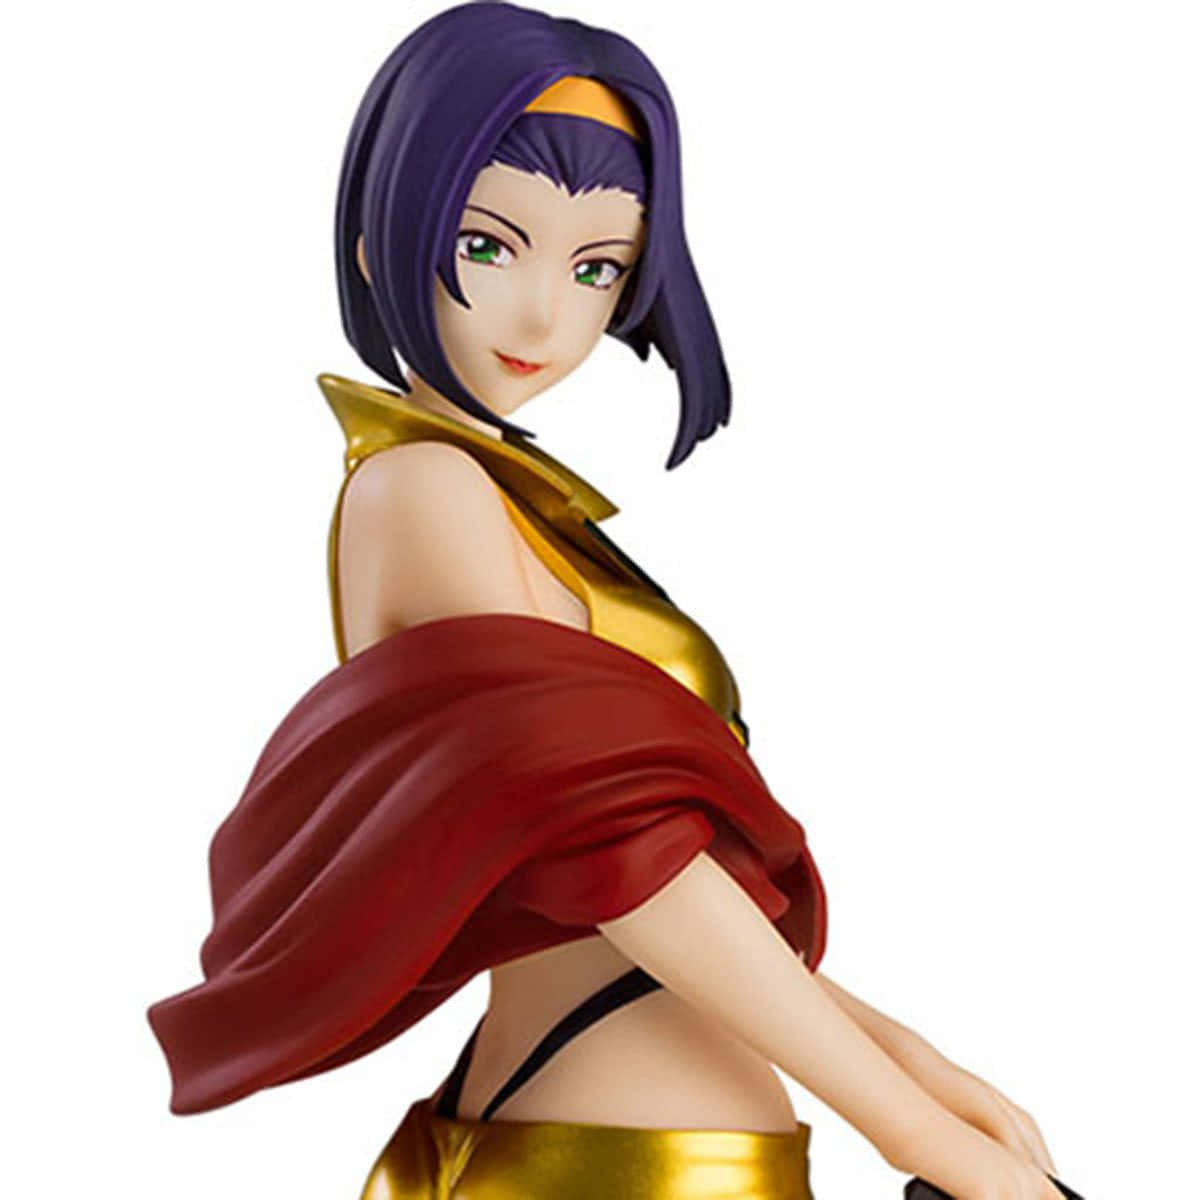 Faye Valentine striking a pose in her signature outfit in a dreamy space backdrop. Wallpaper